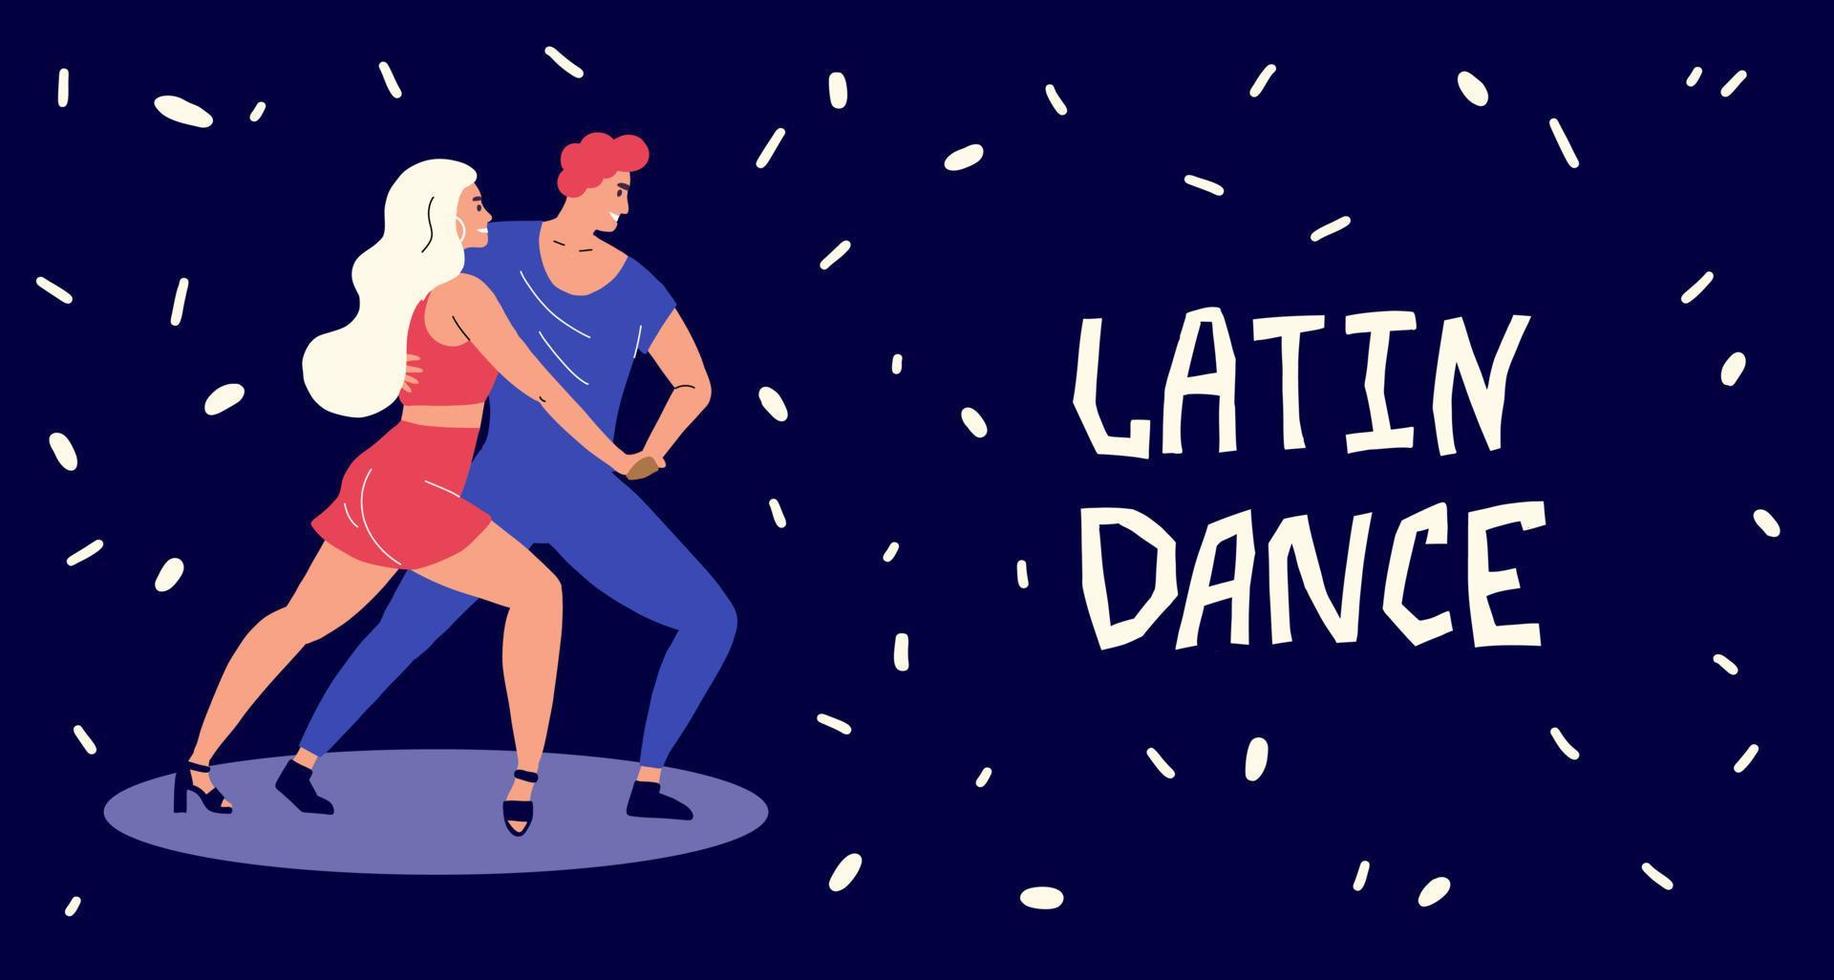 Dancers dance Latin dances. A man and a woman show salsa and bachata. Dance Competition and Tango Festival vector